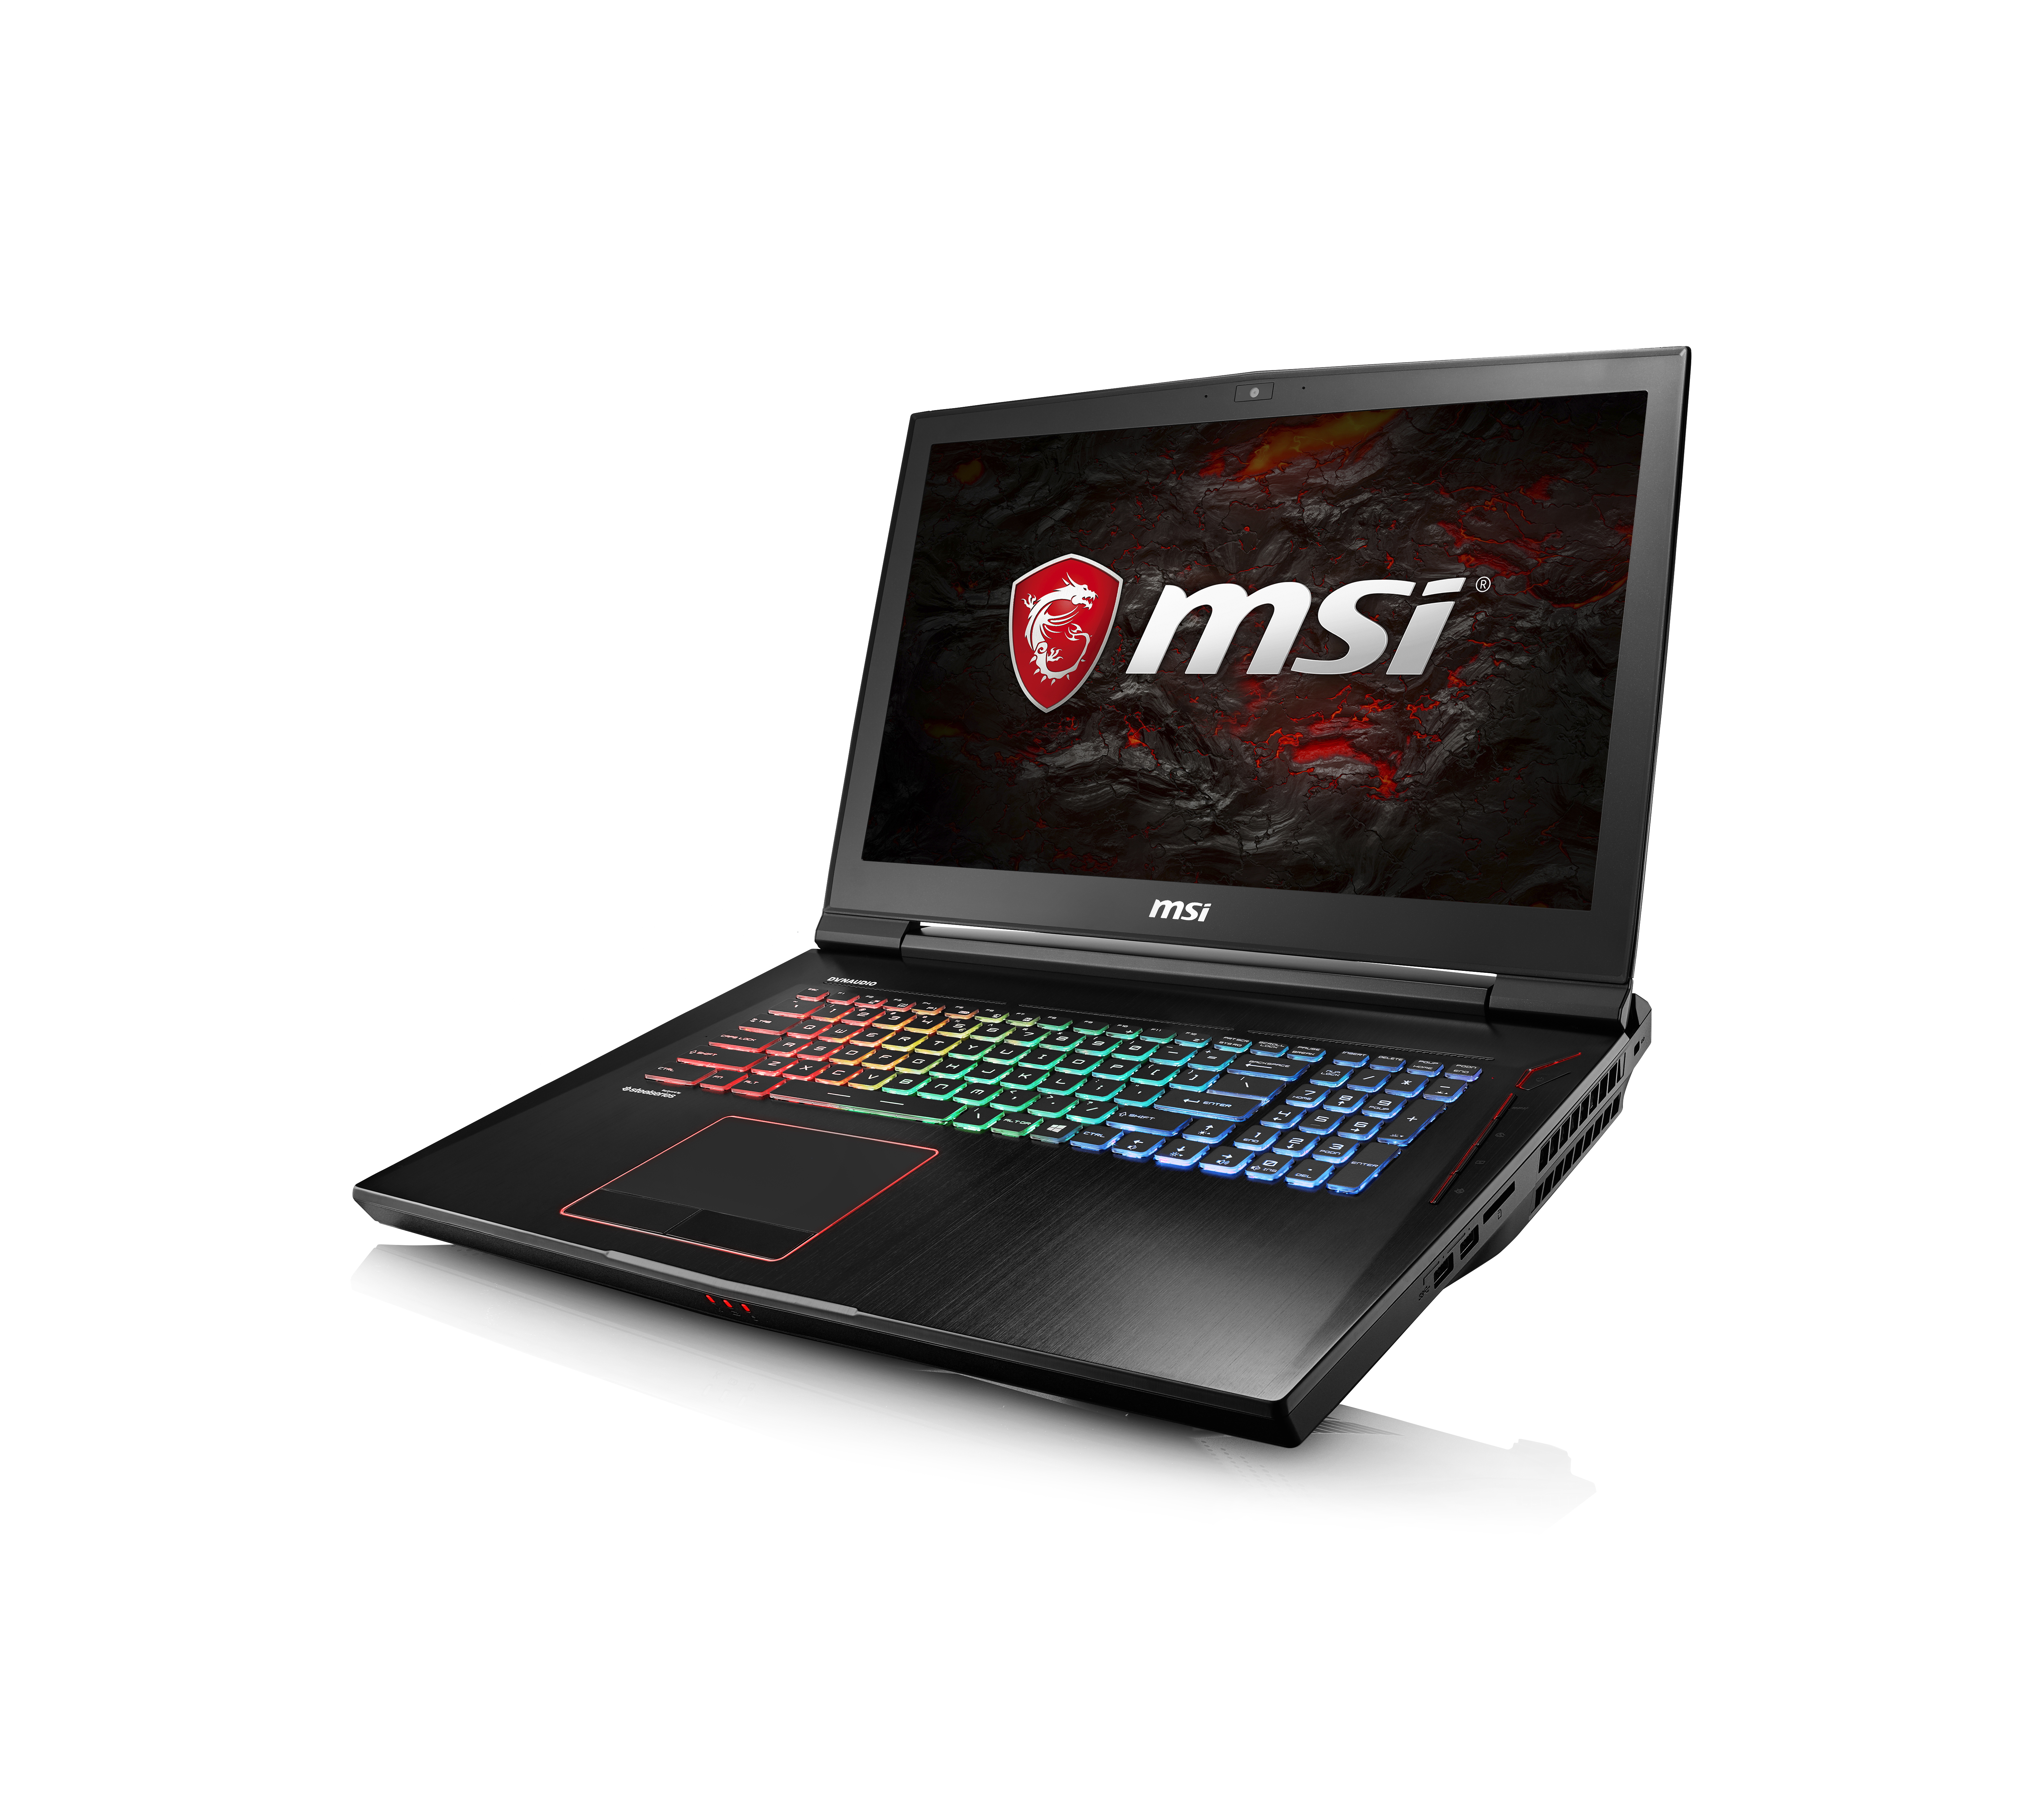 The MSI GT73VR with Windows 10